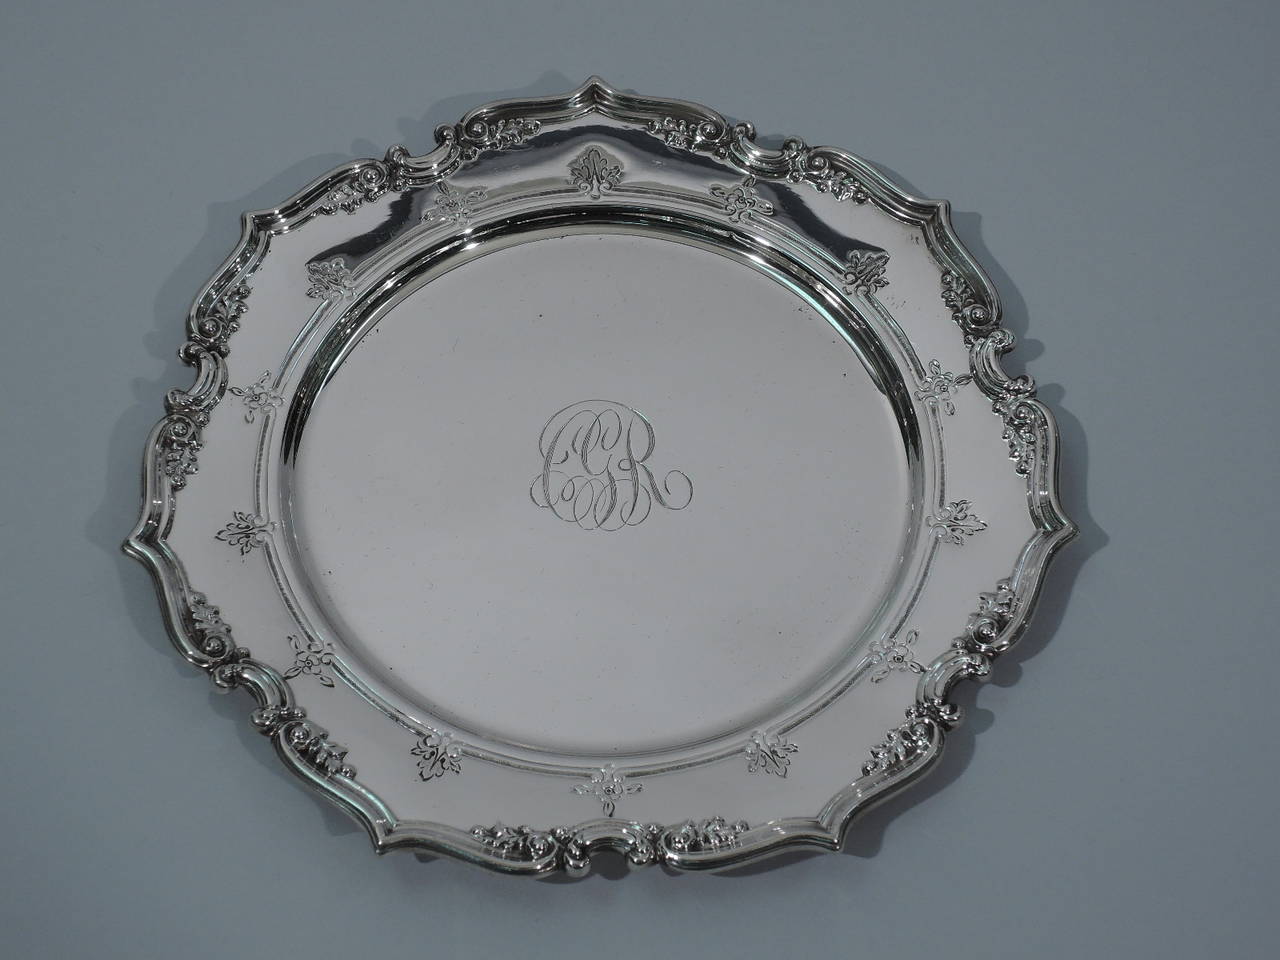 Set of 12 Gorham Sterling Silver Bread and Butter Plates with Fancy Scrolls 1